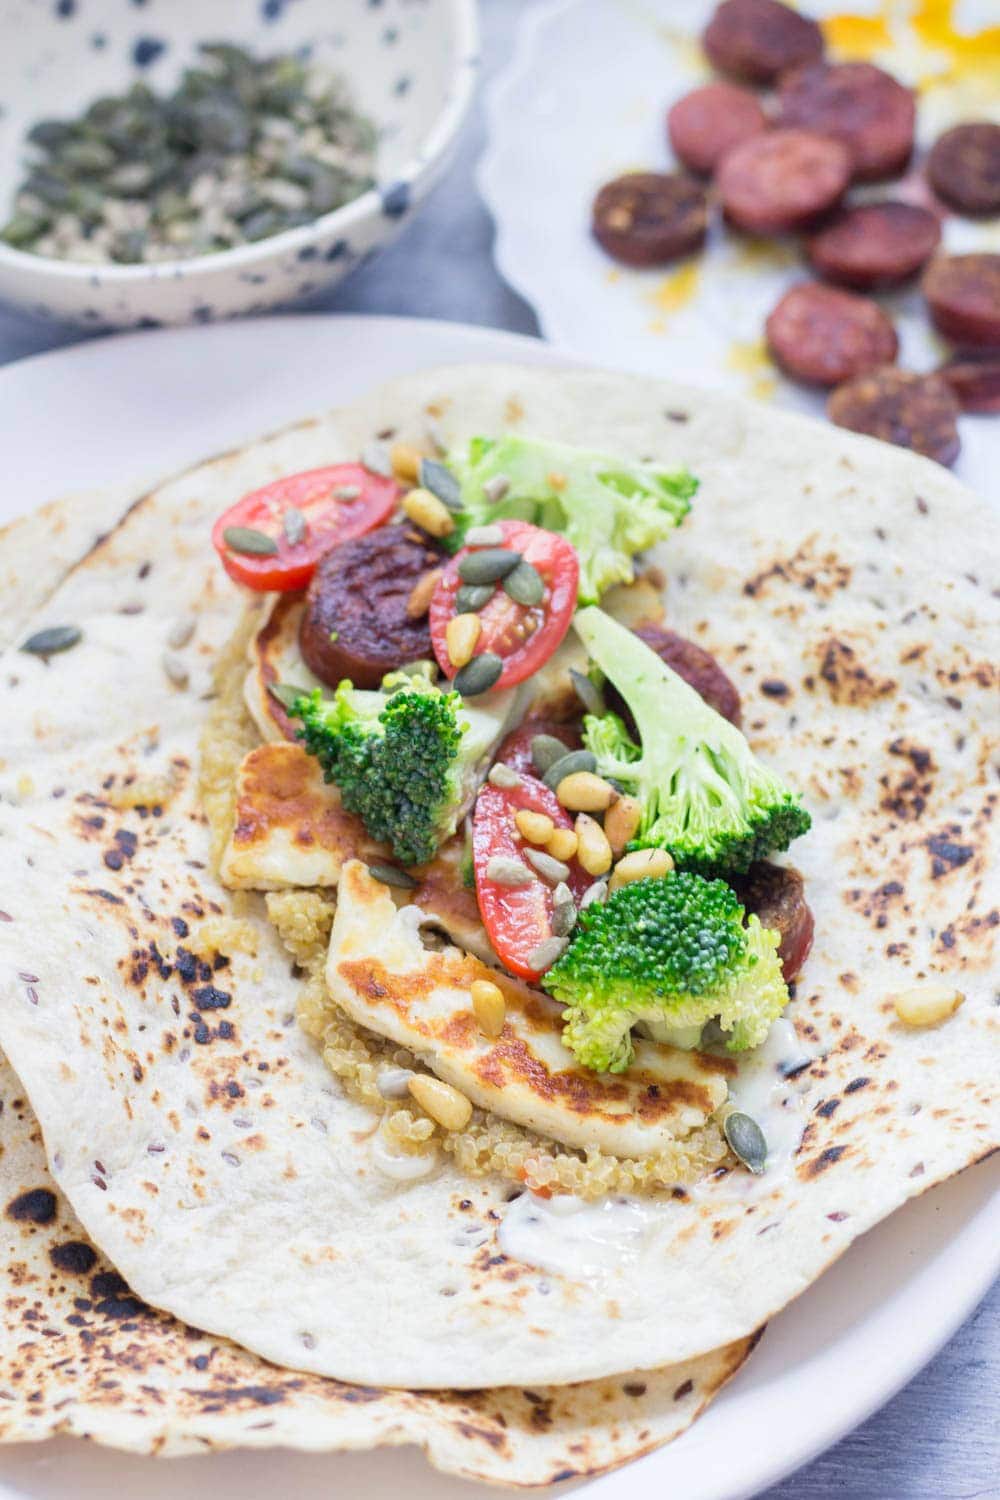 Halloumi & chorizo wraps are such a tasty lunch or dinner. The halloumi & chorizo are wrapped with a fresh broccoli slaw and a sprinkling of nuts and seeds.